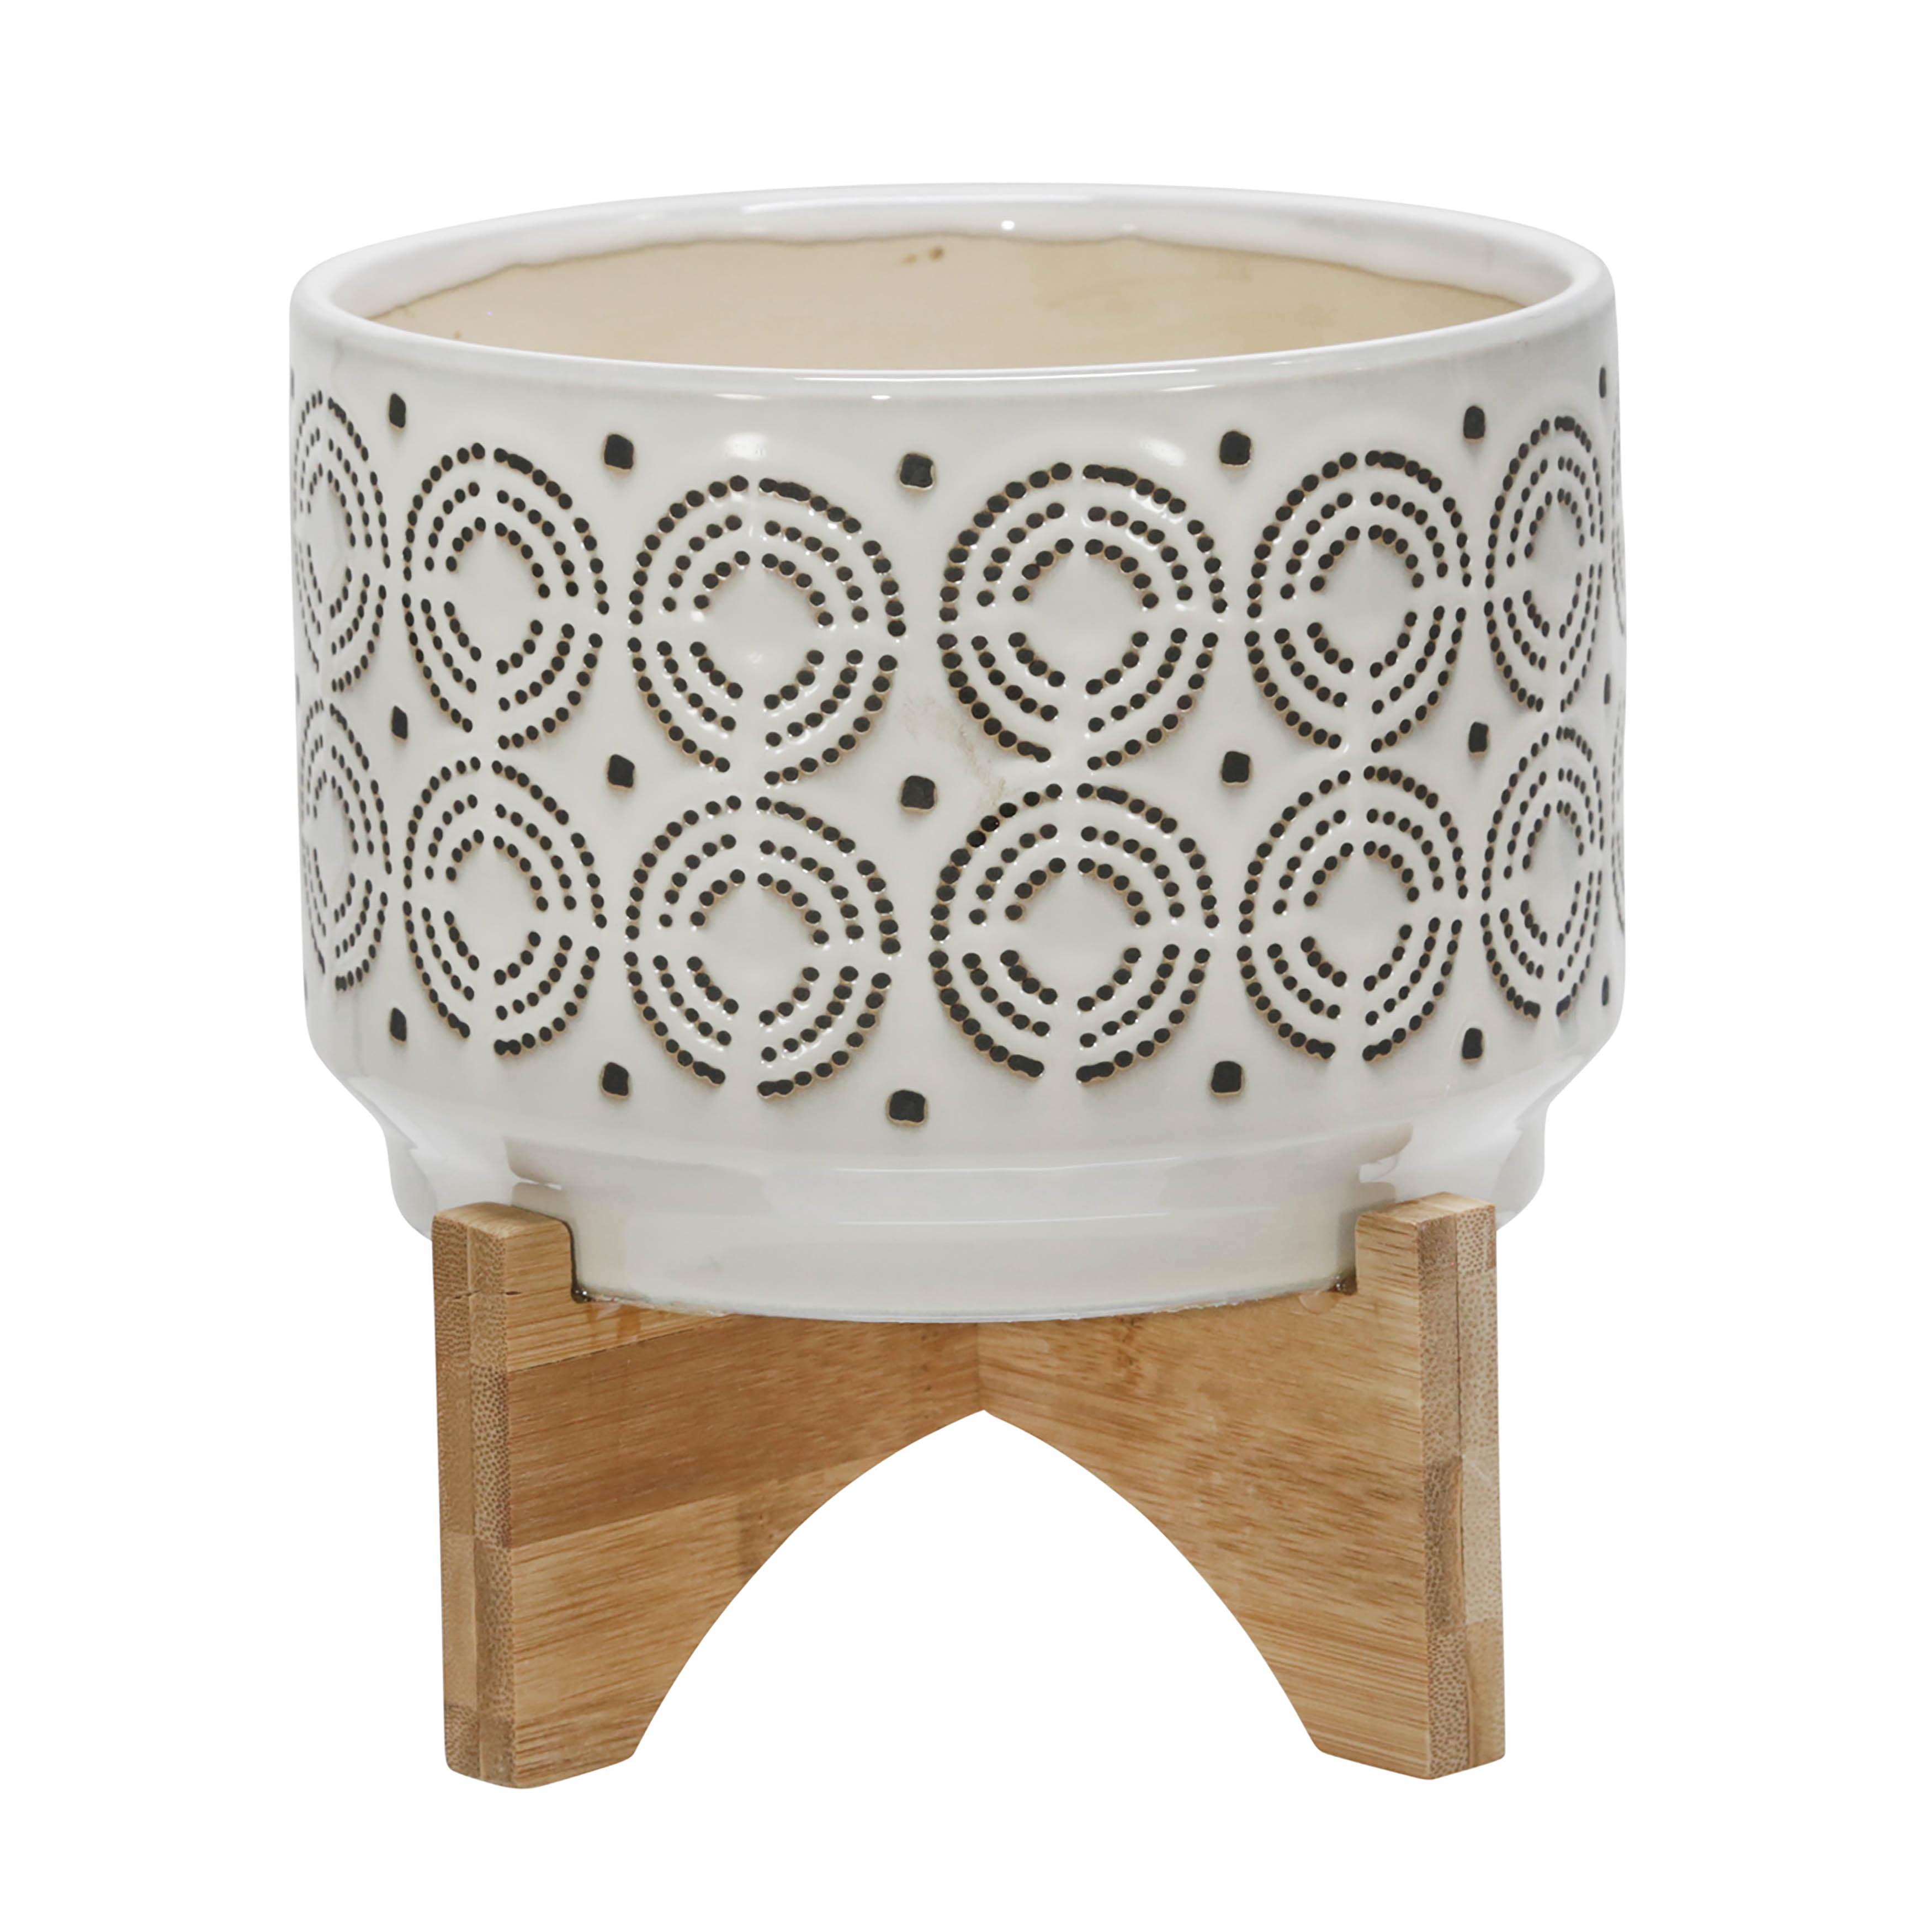 Ivory Swirl Ceramic Planter on Stand, 7"x8" - Contemporary Outdoor Accent